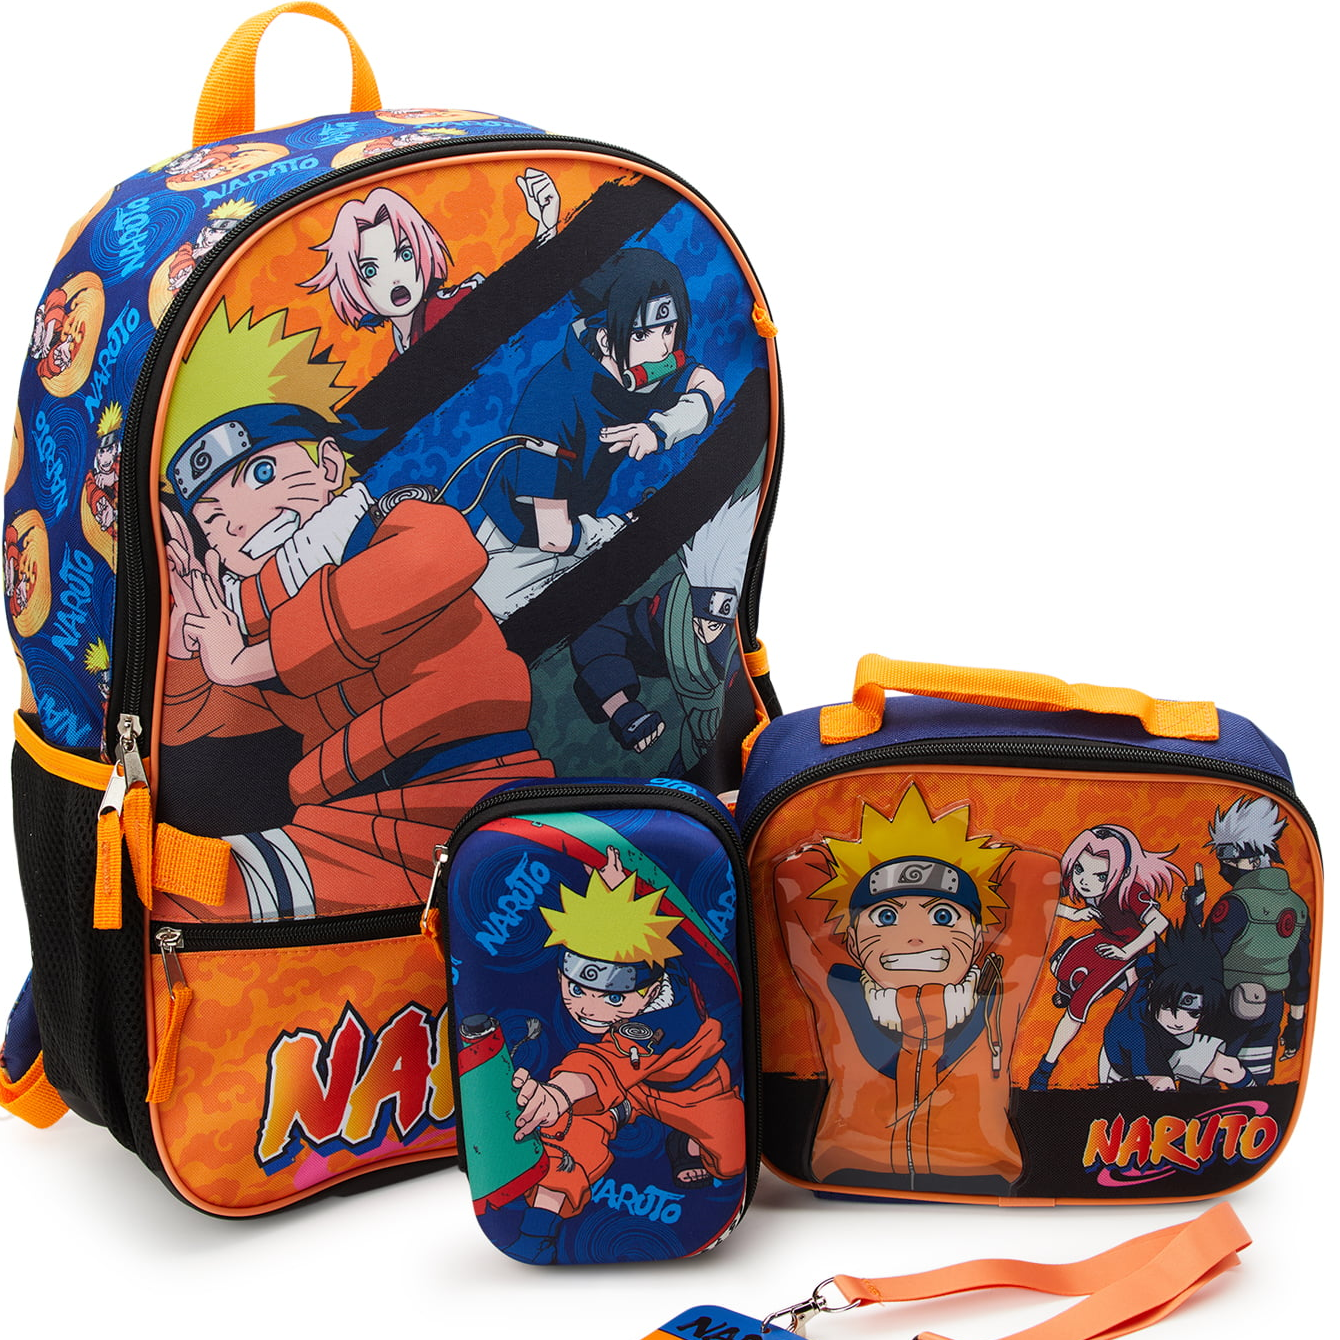 Naruto 3-Piece Set School Backpack Kids With Diagonal Lunch Bag Pencil Case